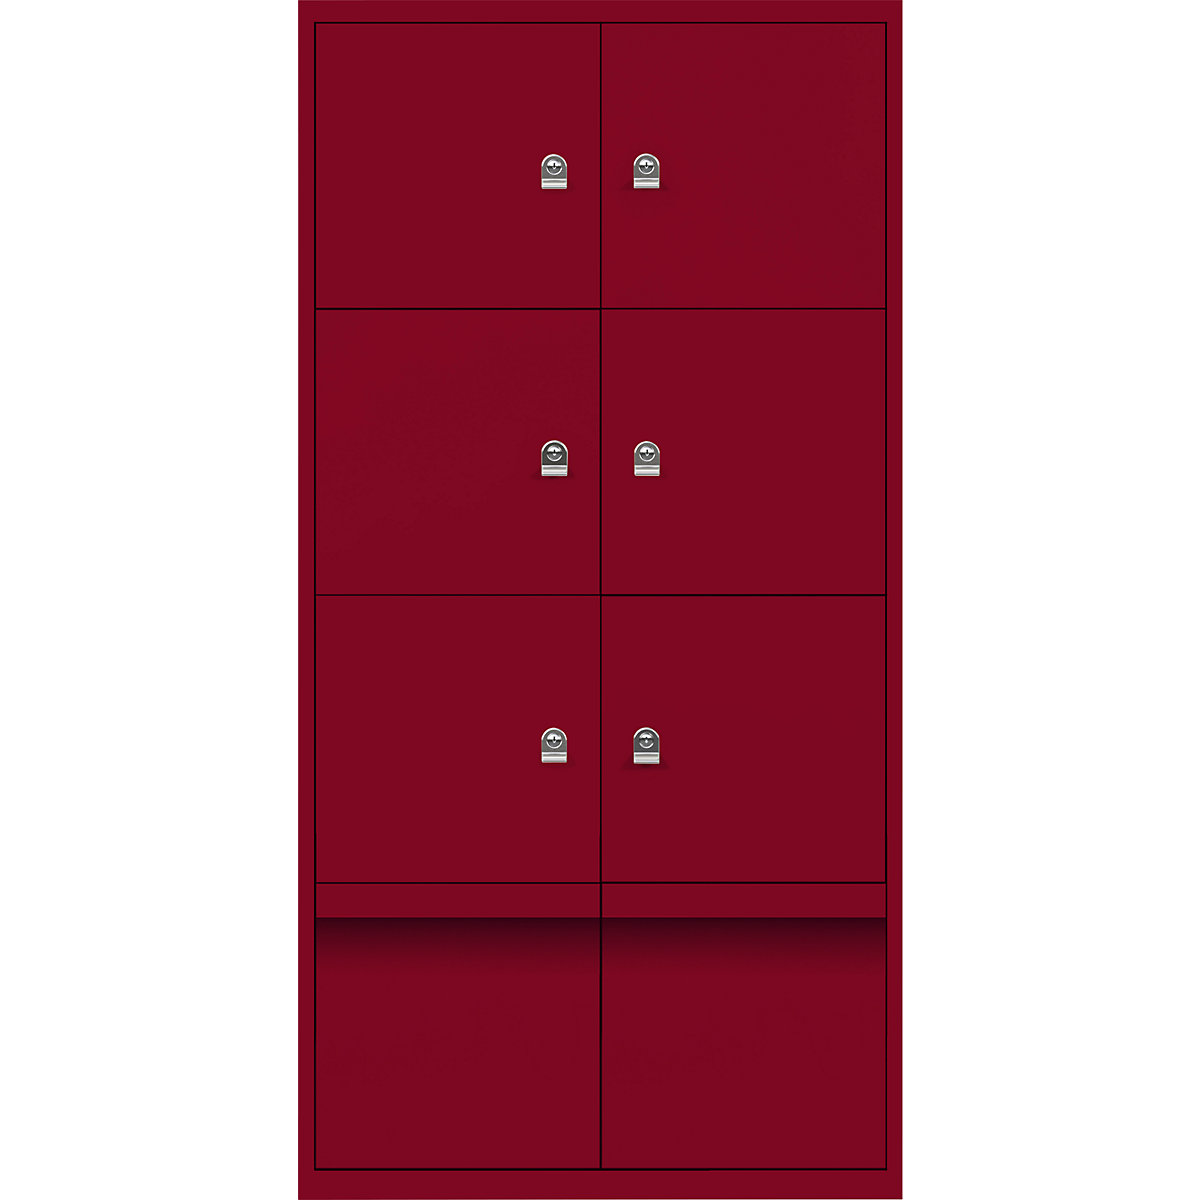 BISLEY – LateralFile™ lodge, with 6 lockable compartments and 2 drawers, height 375 mm each, cardinal red